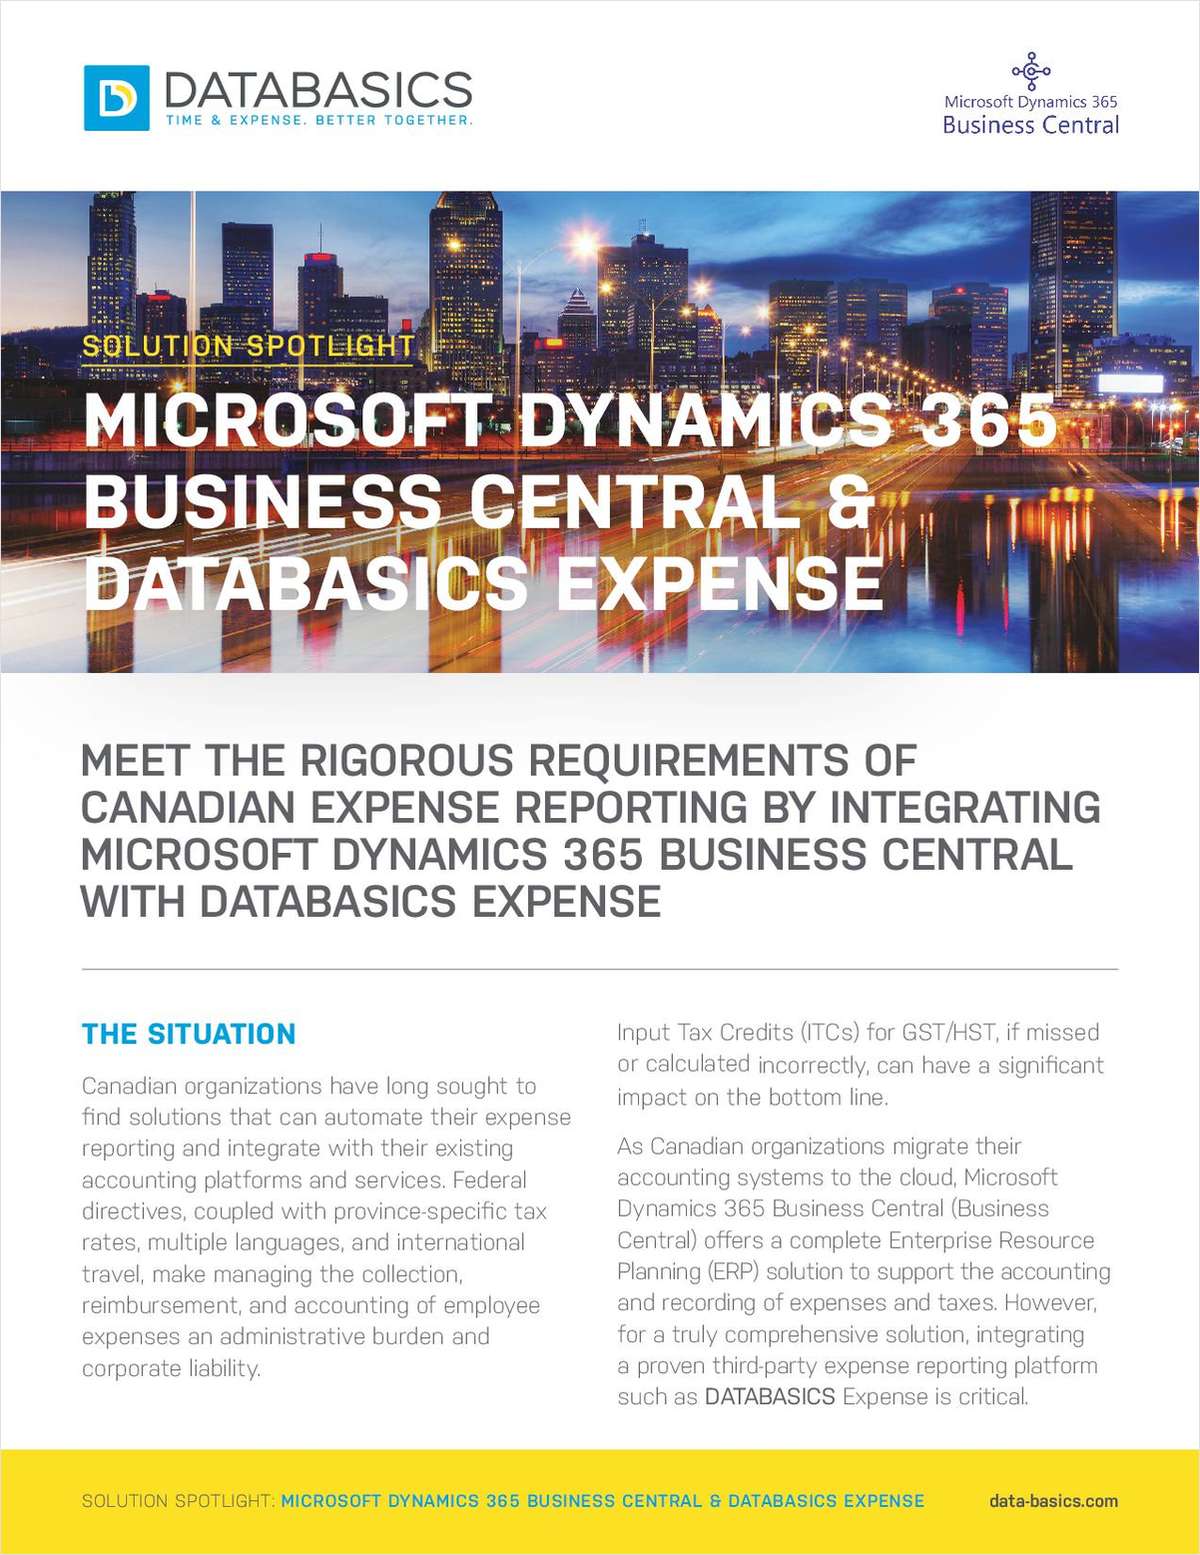 DATABASICS & Microsoft Dynamics 365 Business Central. Better Together.